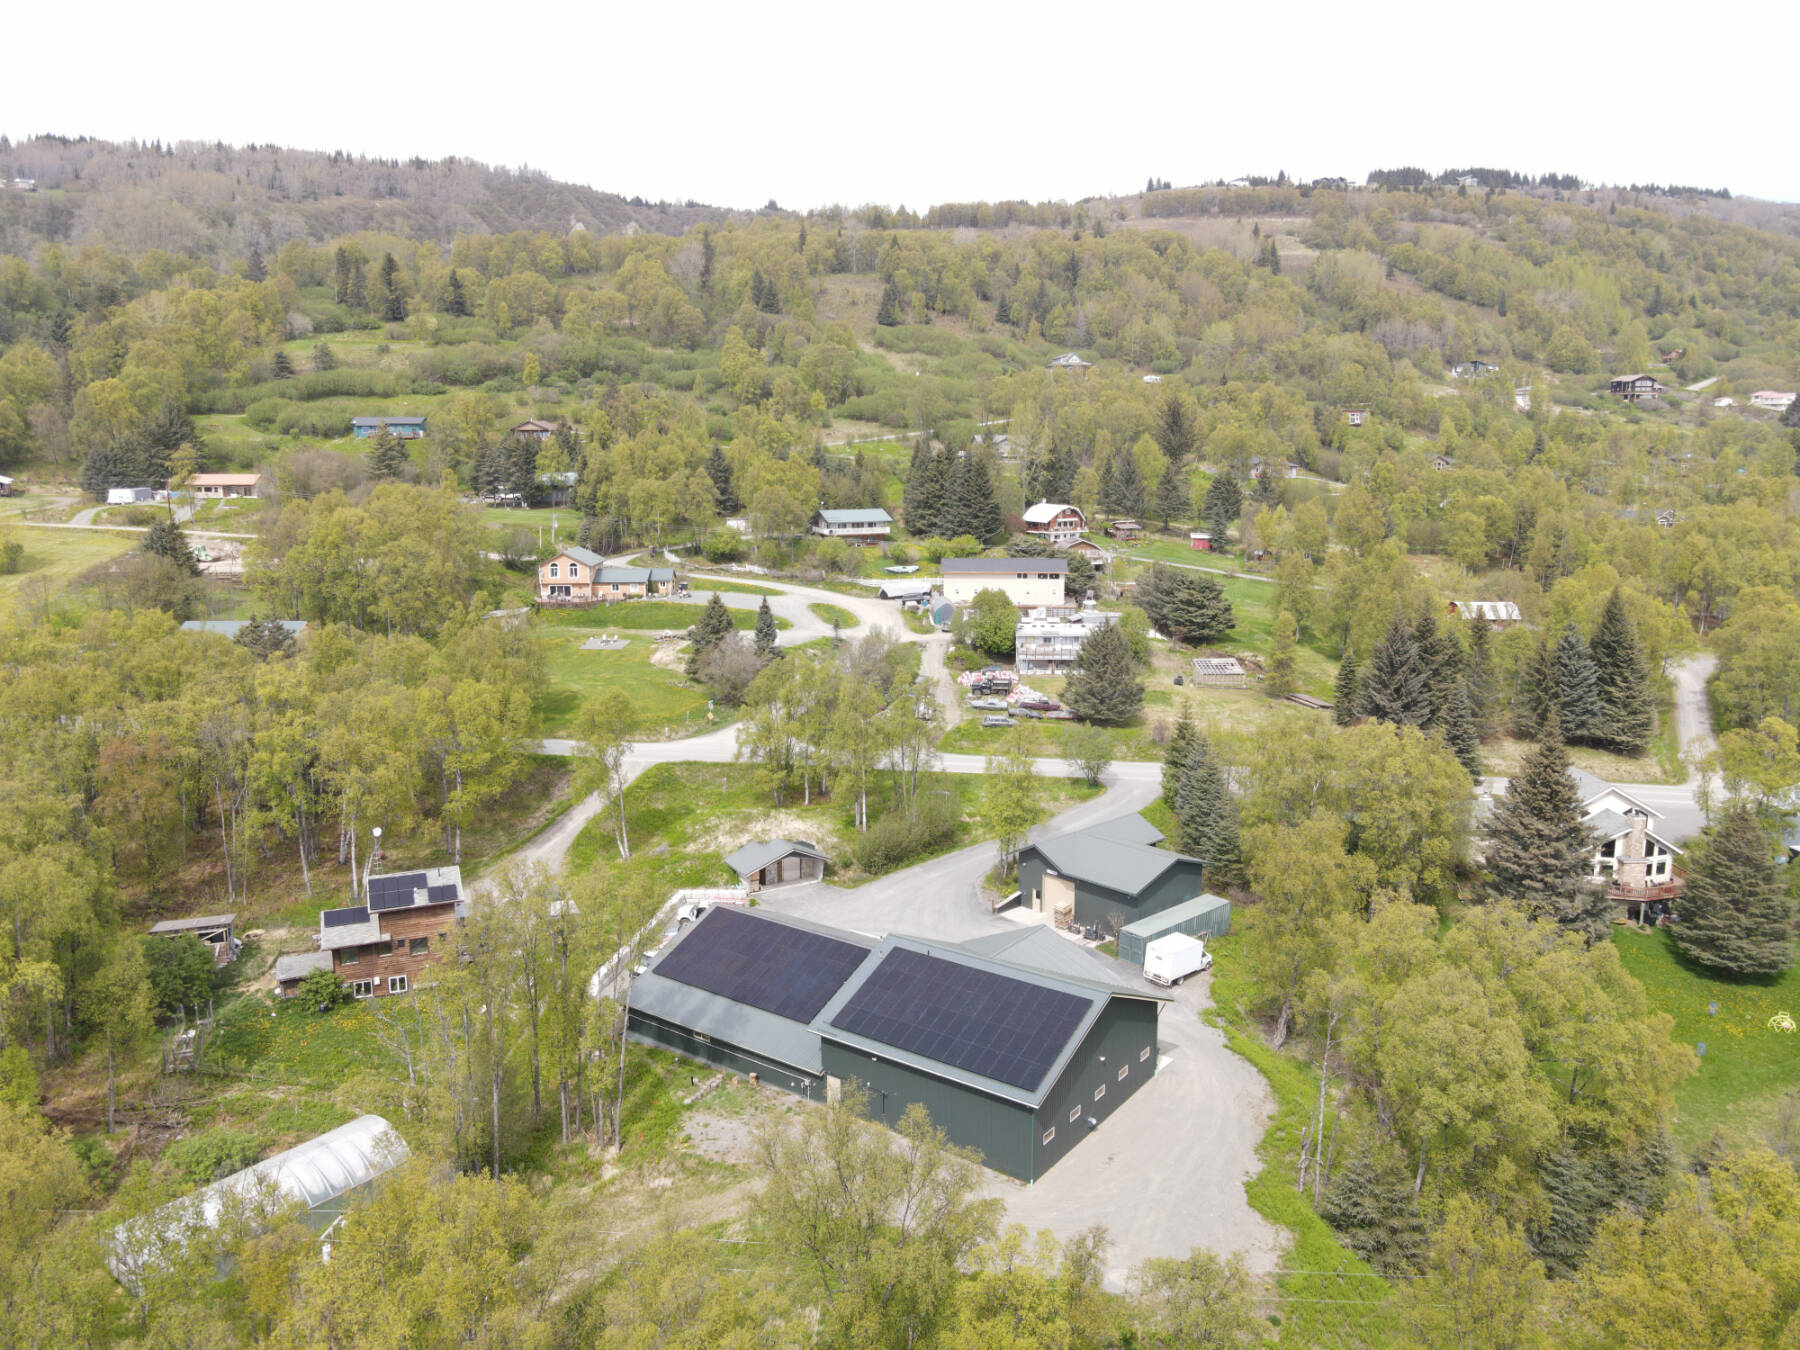 An aerial view of the Bear Creek Winery bottling works facility is seen in this June 2022 photograph after installation of the solar panel system by Midnight Sun Solar, LLC in Homer, Alaska. Photo provided by Alexander Sievers